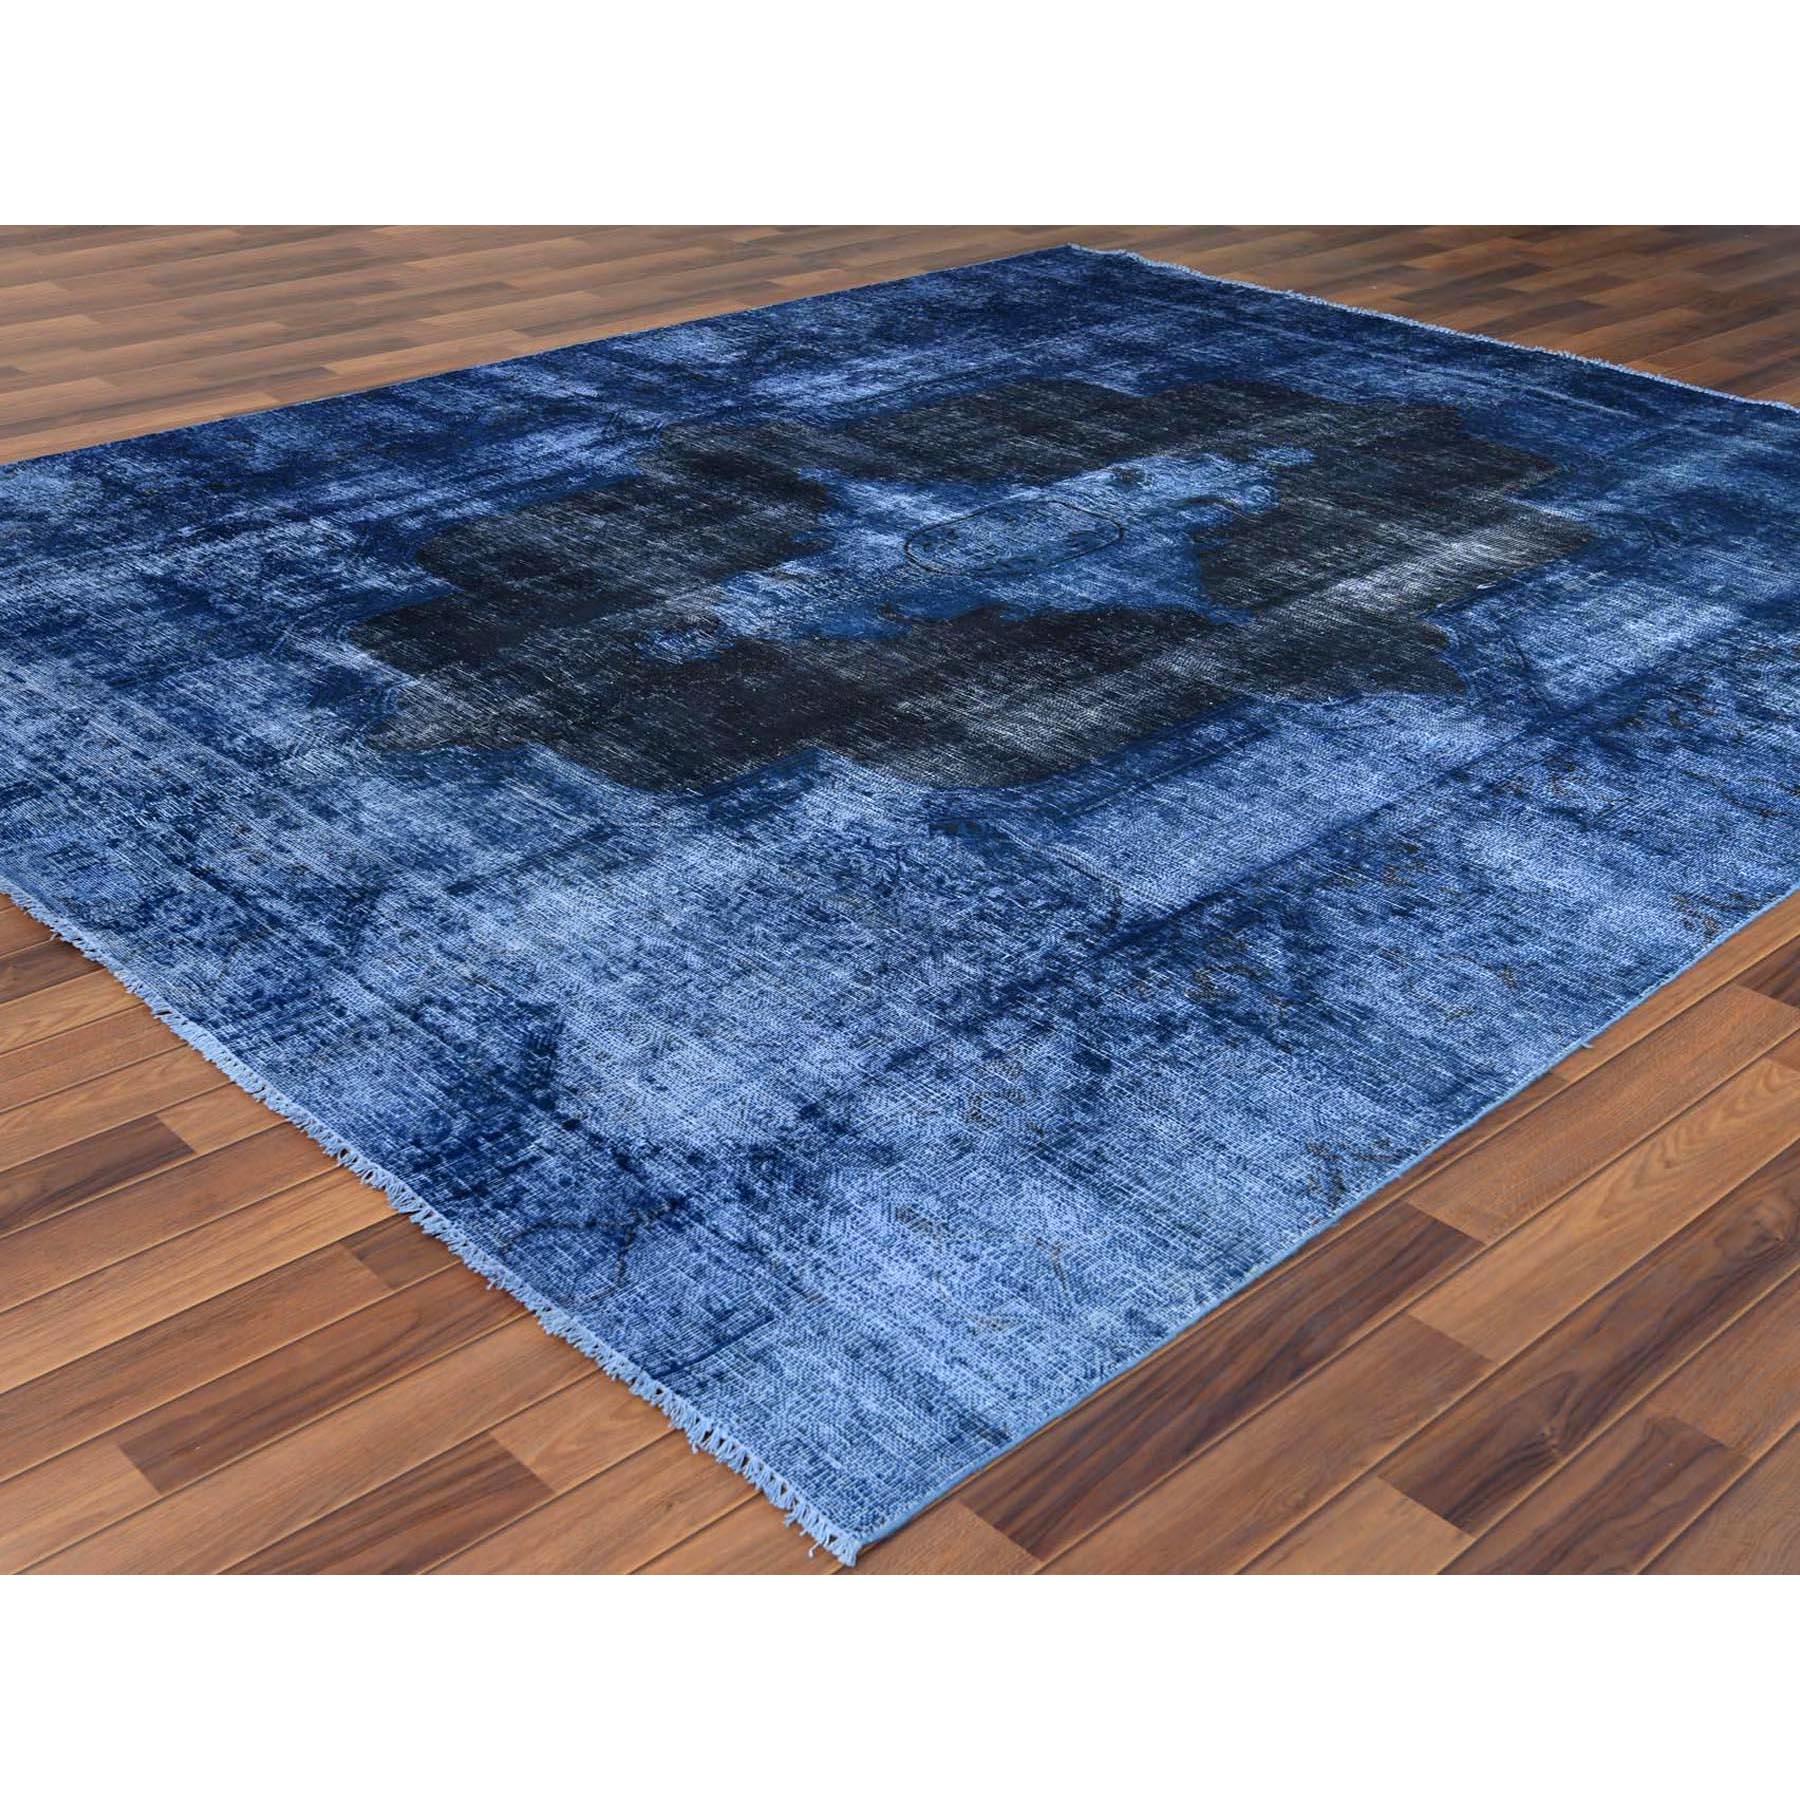 Hand-Knotted Semi Antique Blue Overcast Sheared Low Persian Kerman Oriental Rug